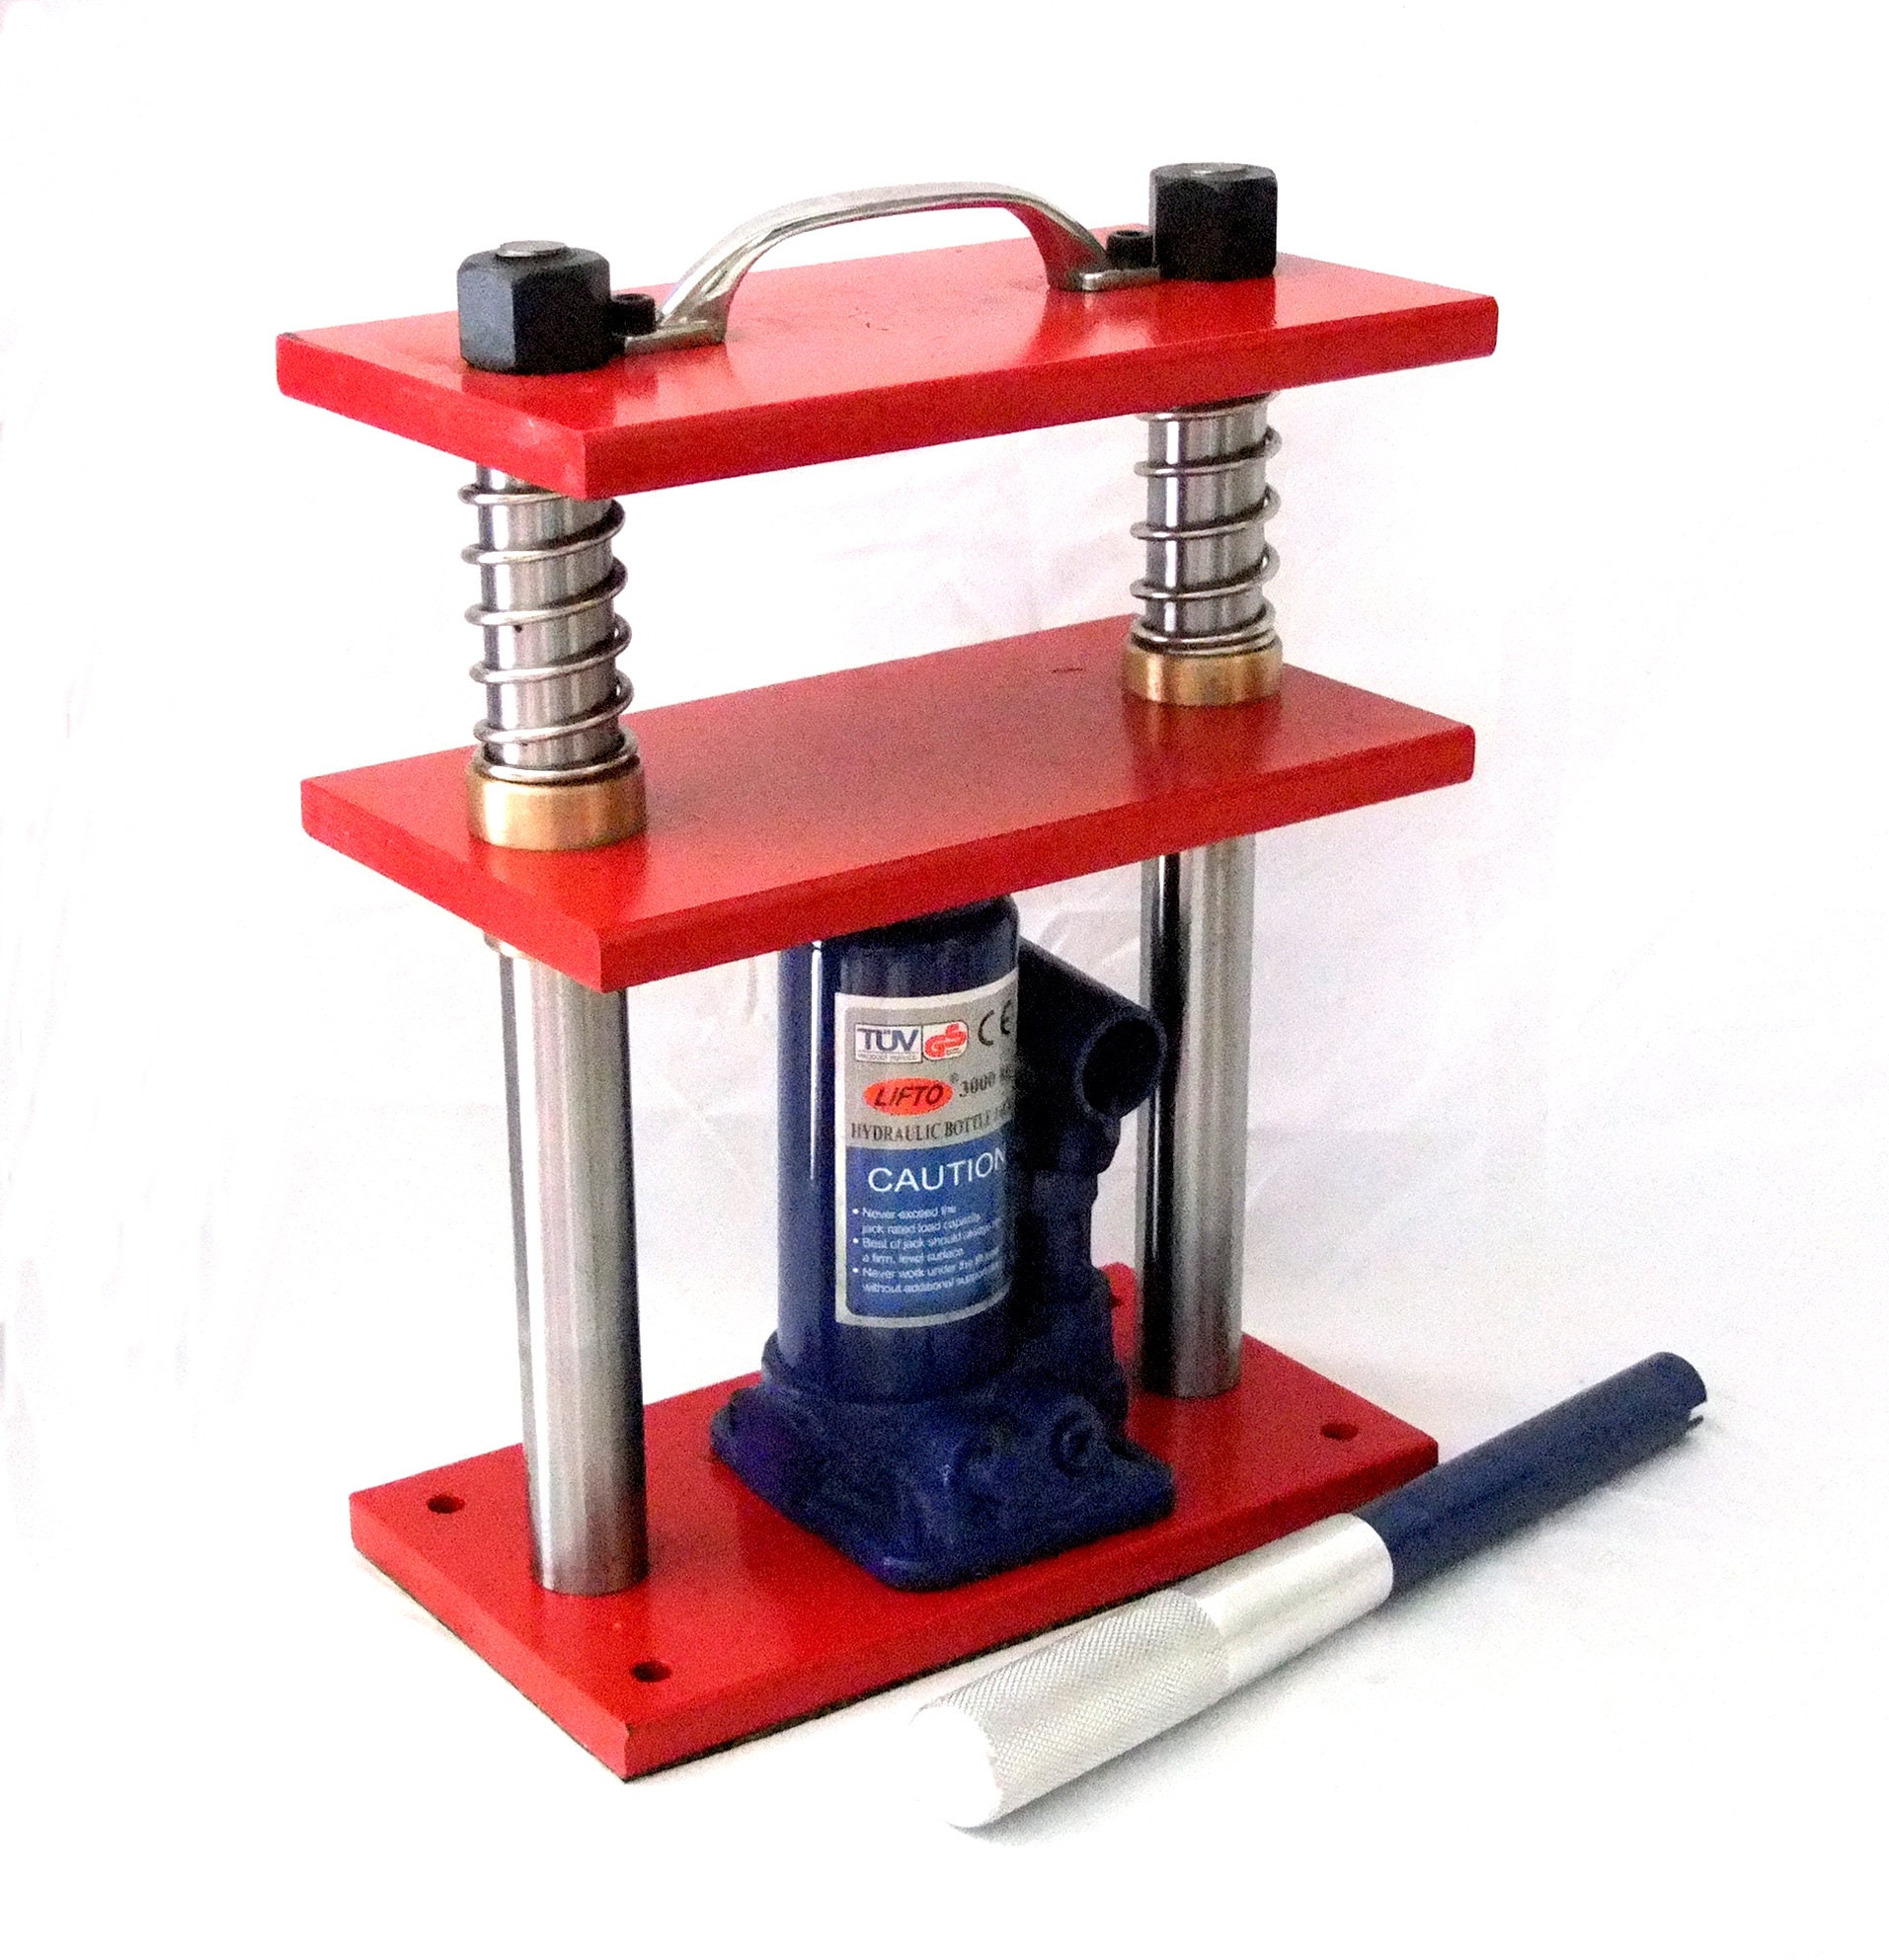 Top 5 Metal Stamping Tools - The Bench